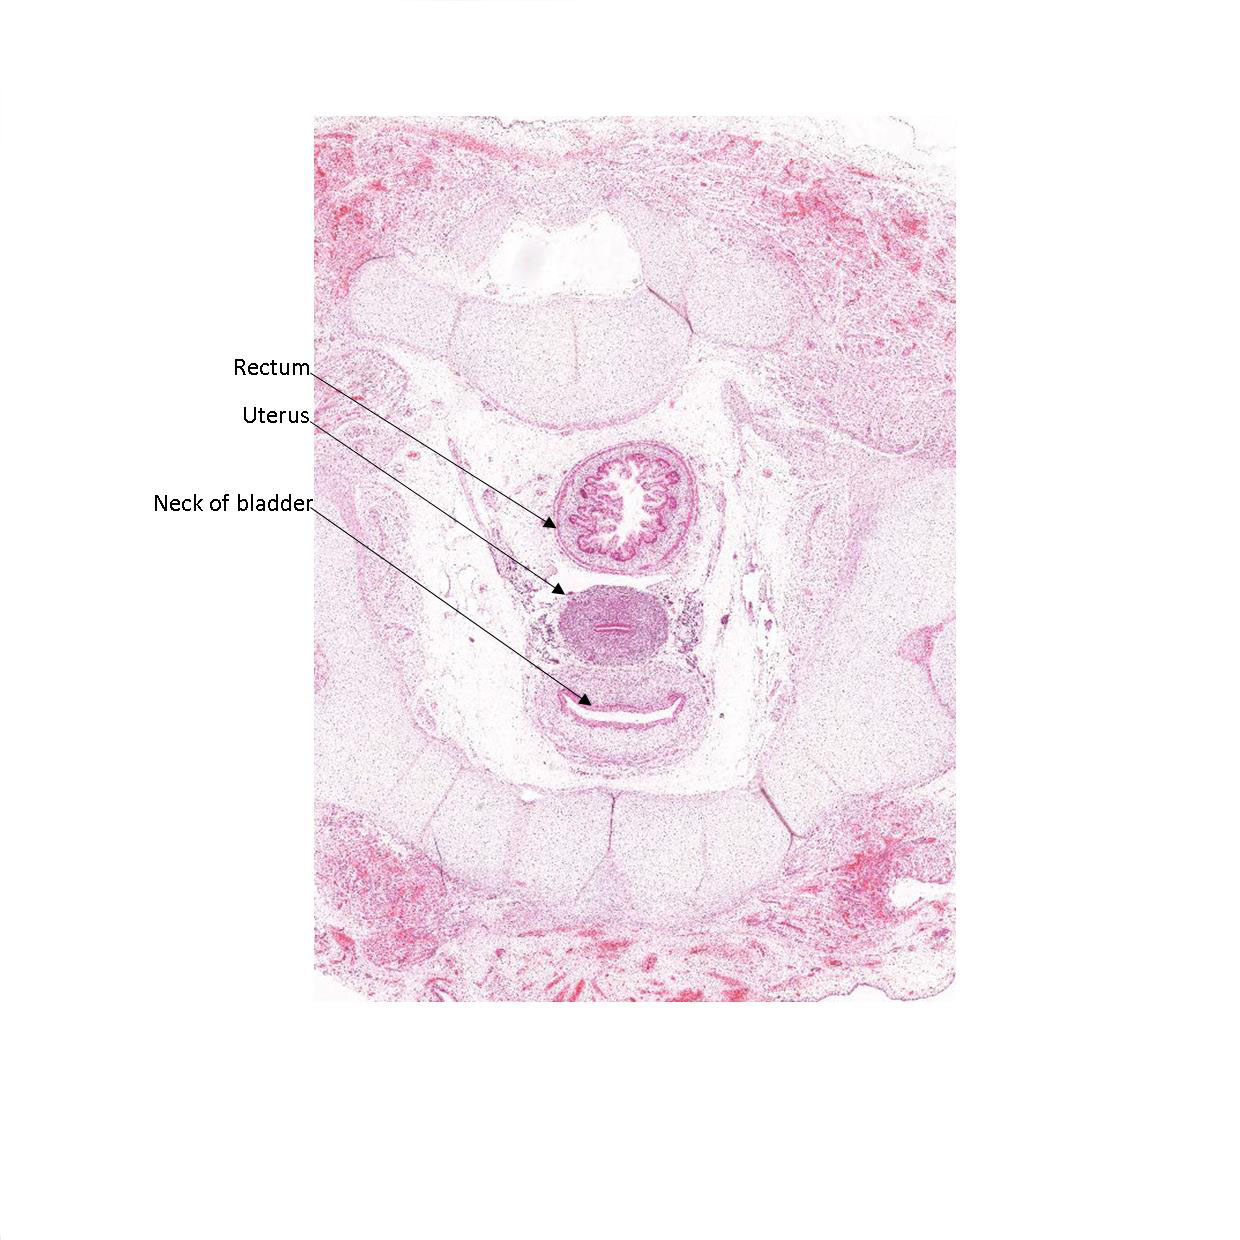 A histology section of a human fetus